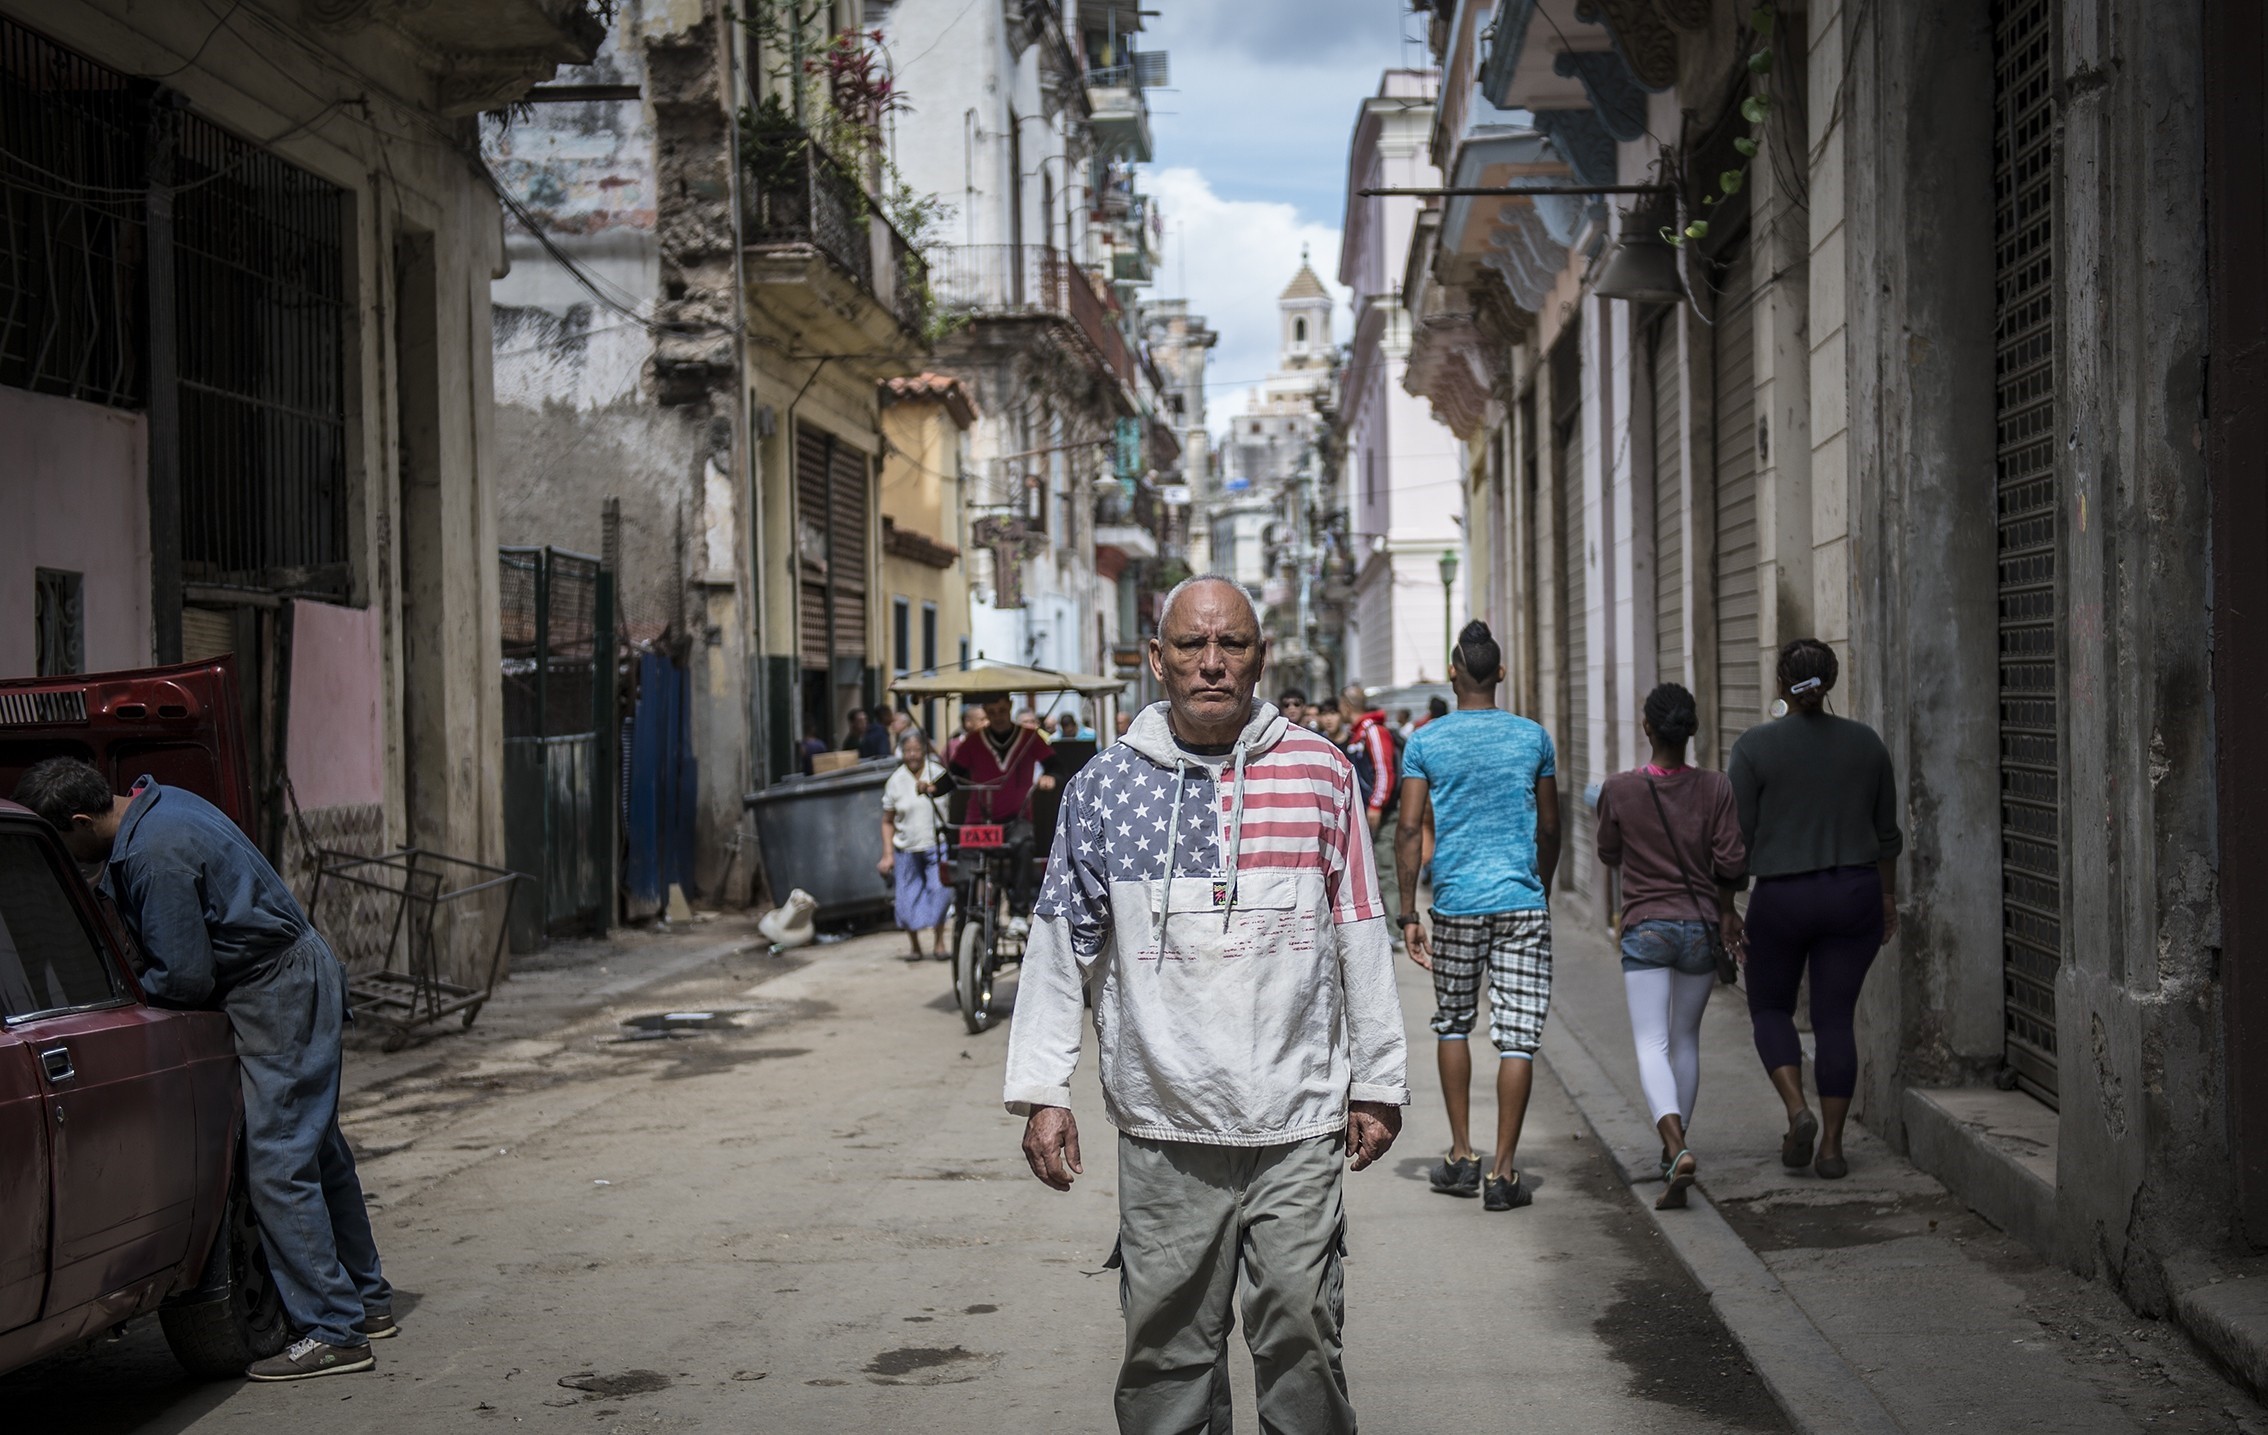 Life in Cuba during talks with U.S.